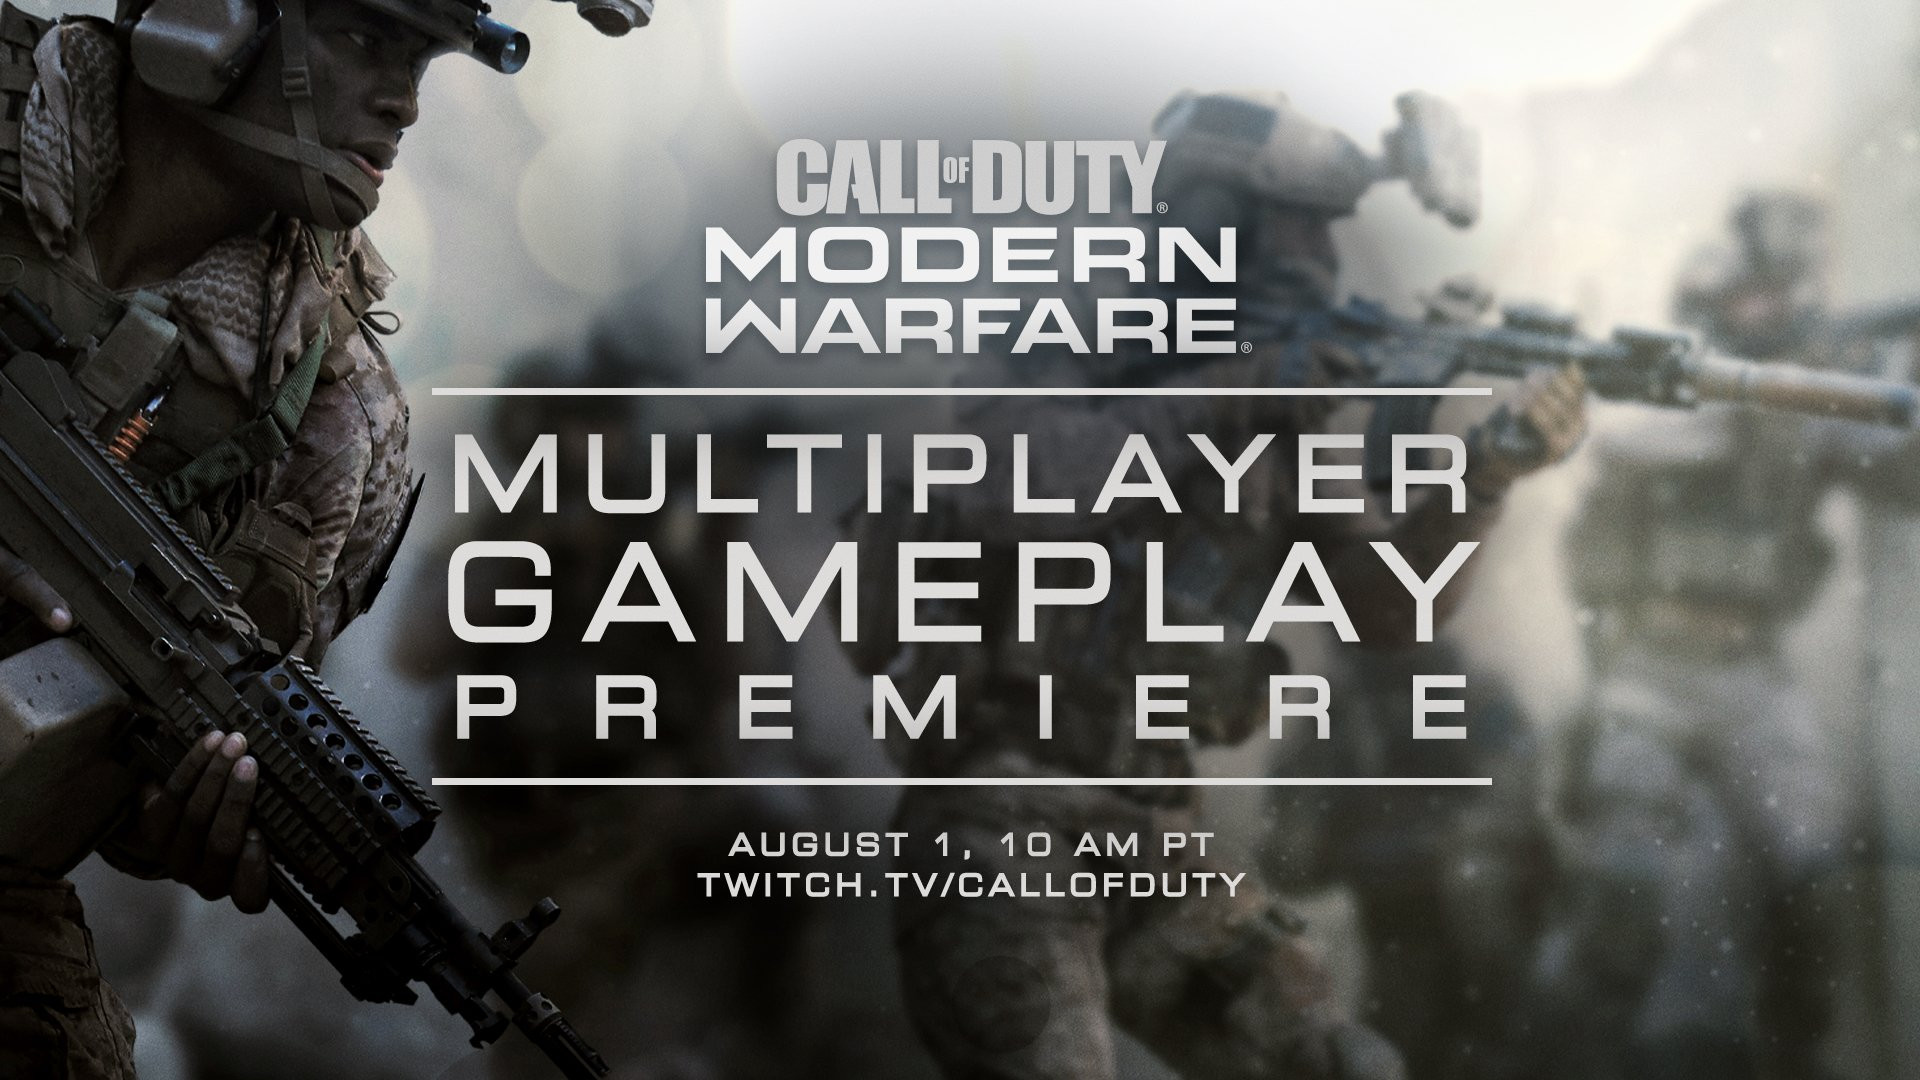 Call Of Duty Modern Warfare Multiplayer Universe To Be